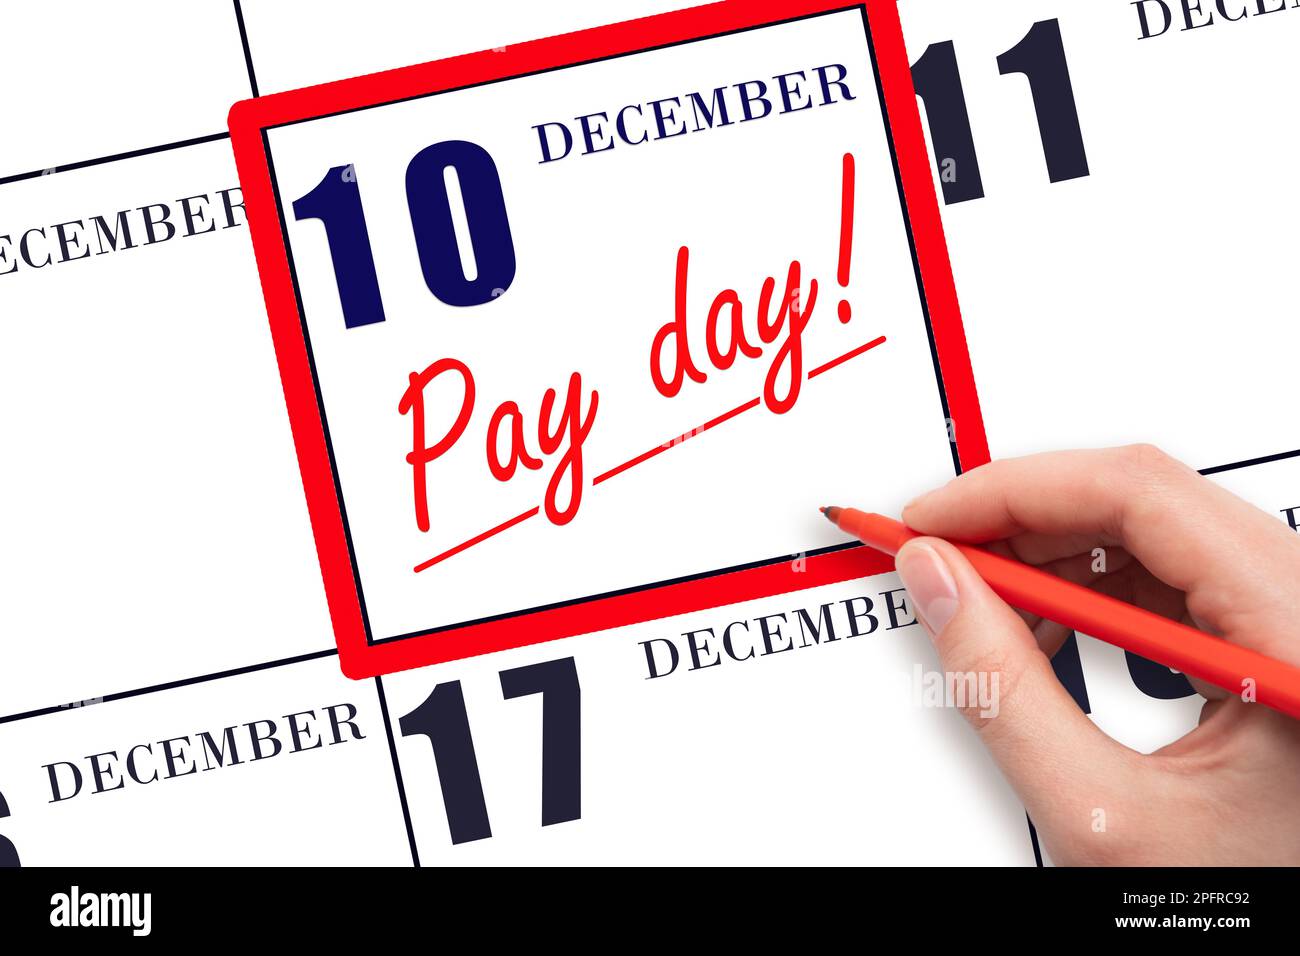 10th day of December. Hand writing text PAY DATE on calendar date December 10 and underline it. Payment due date.  Reminder concept of payment. Winter Stock Photo